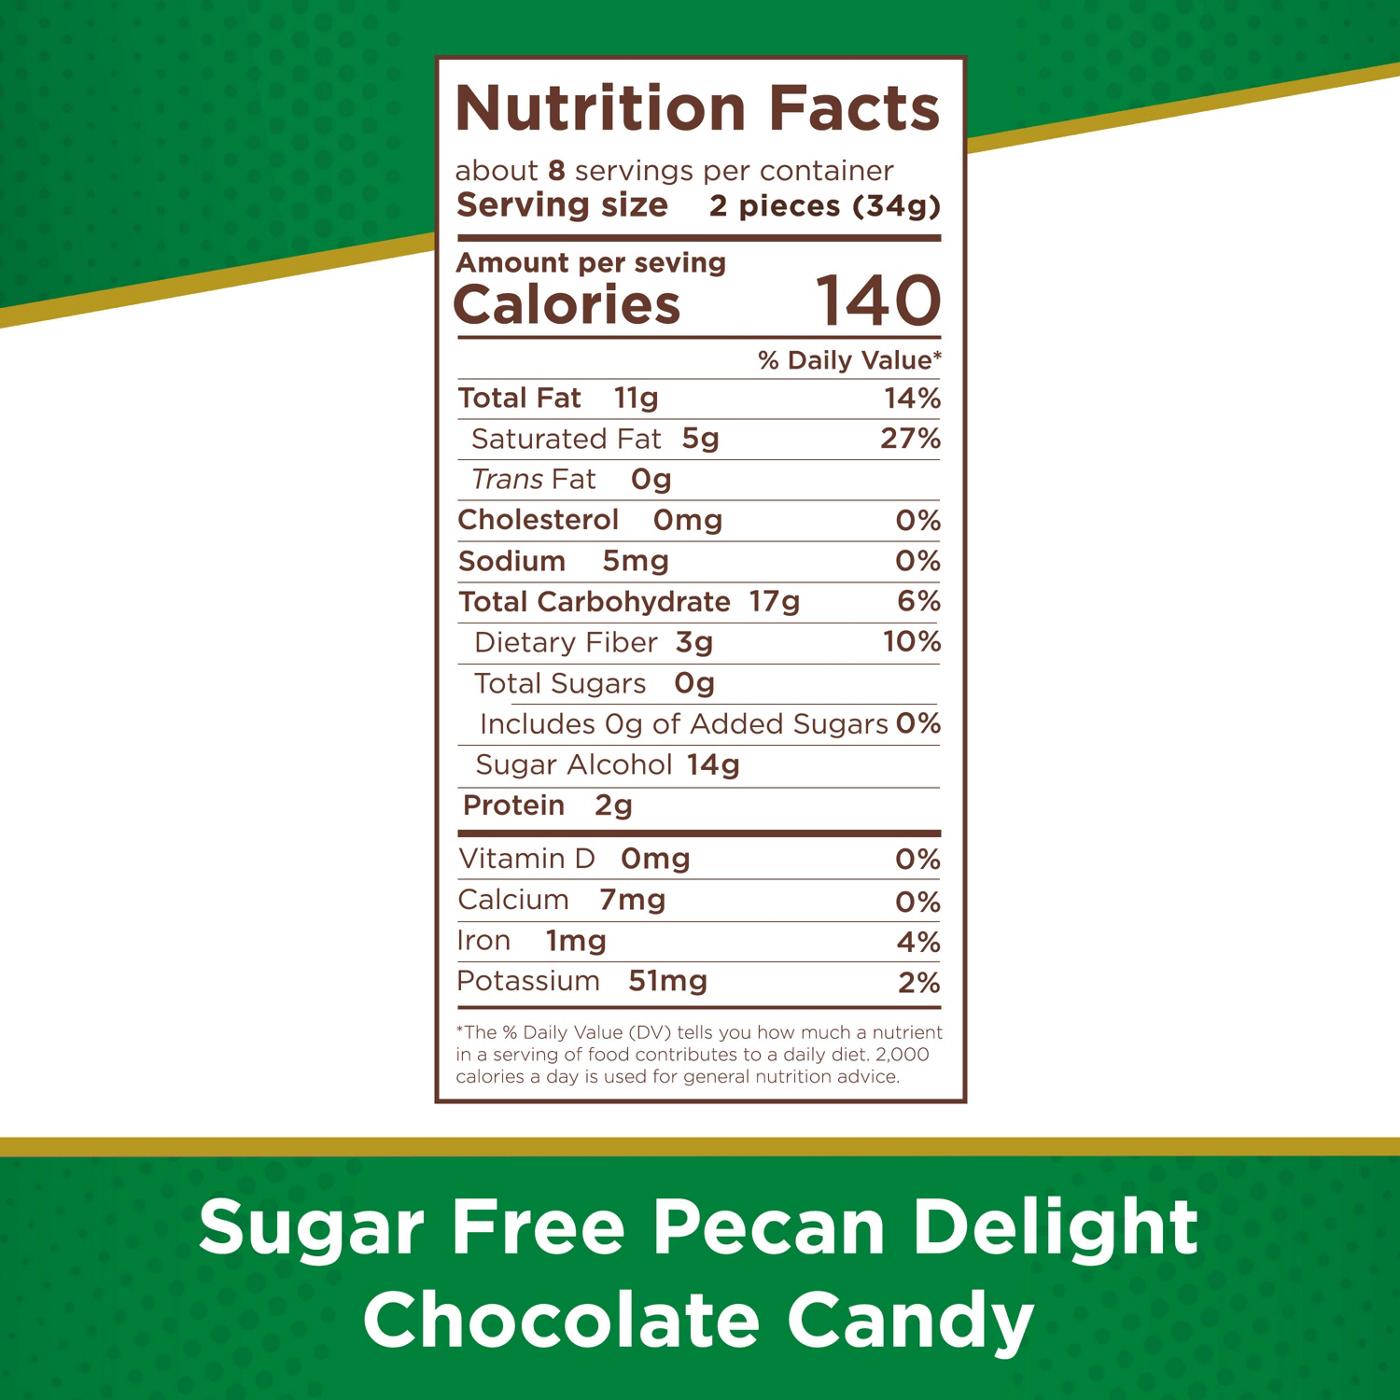 Russell Stover Sugar Free Pecan Delights; image 8 of 8